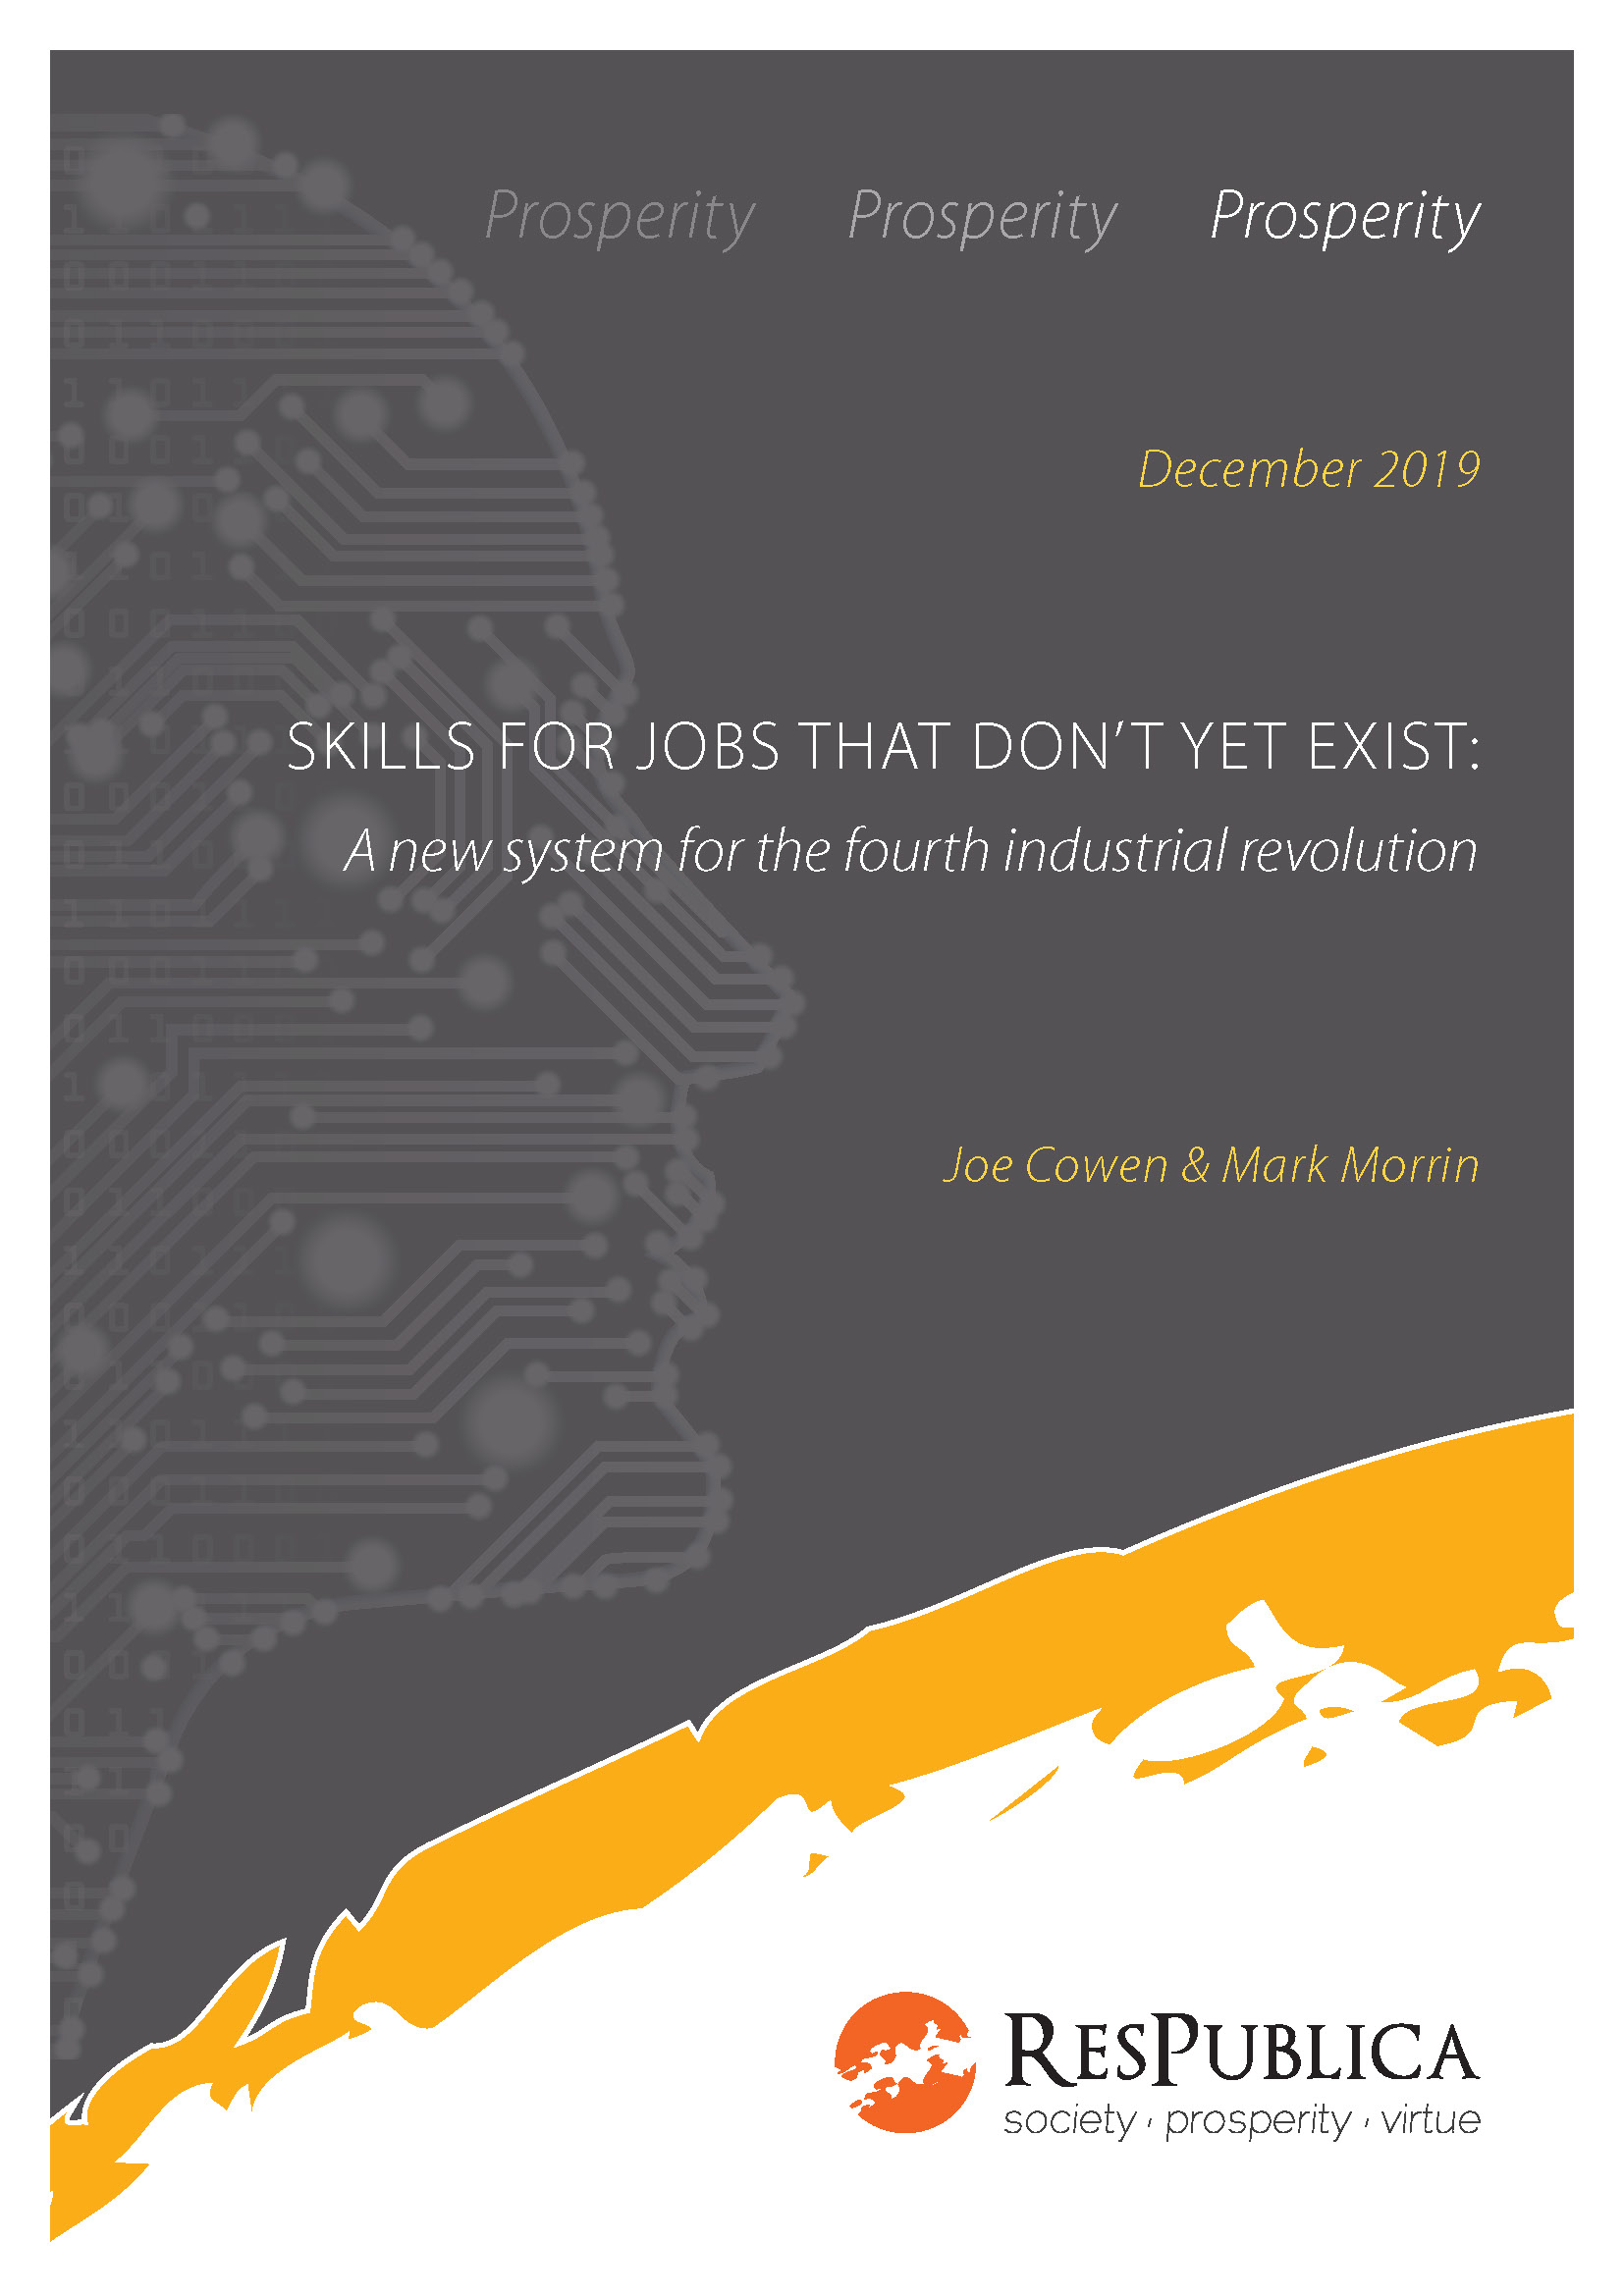 Skills for jobs that don’t yet exist: A new system for the fourth industrial revolution